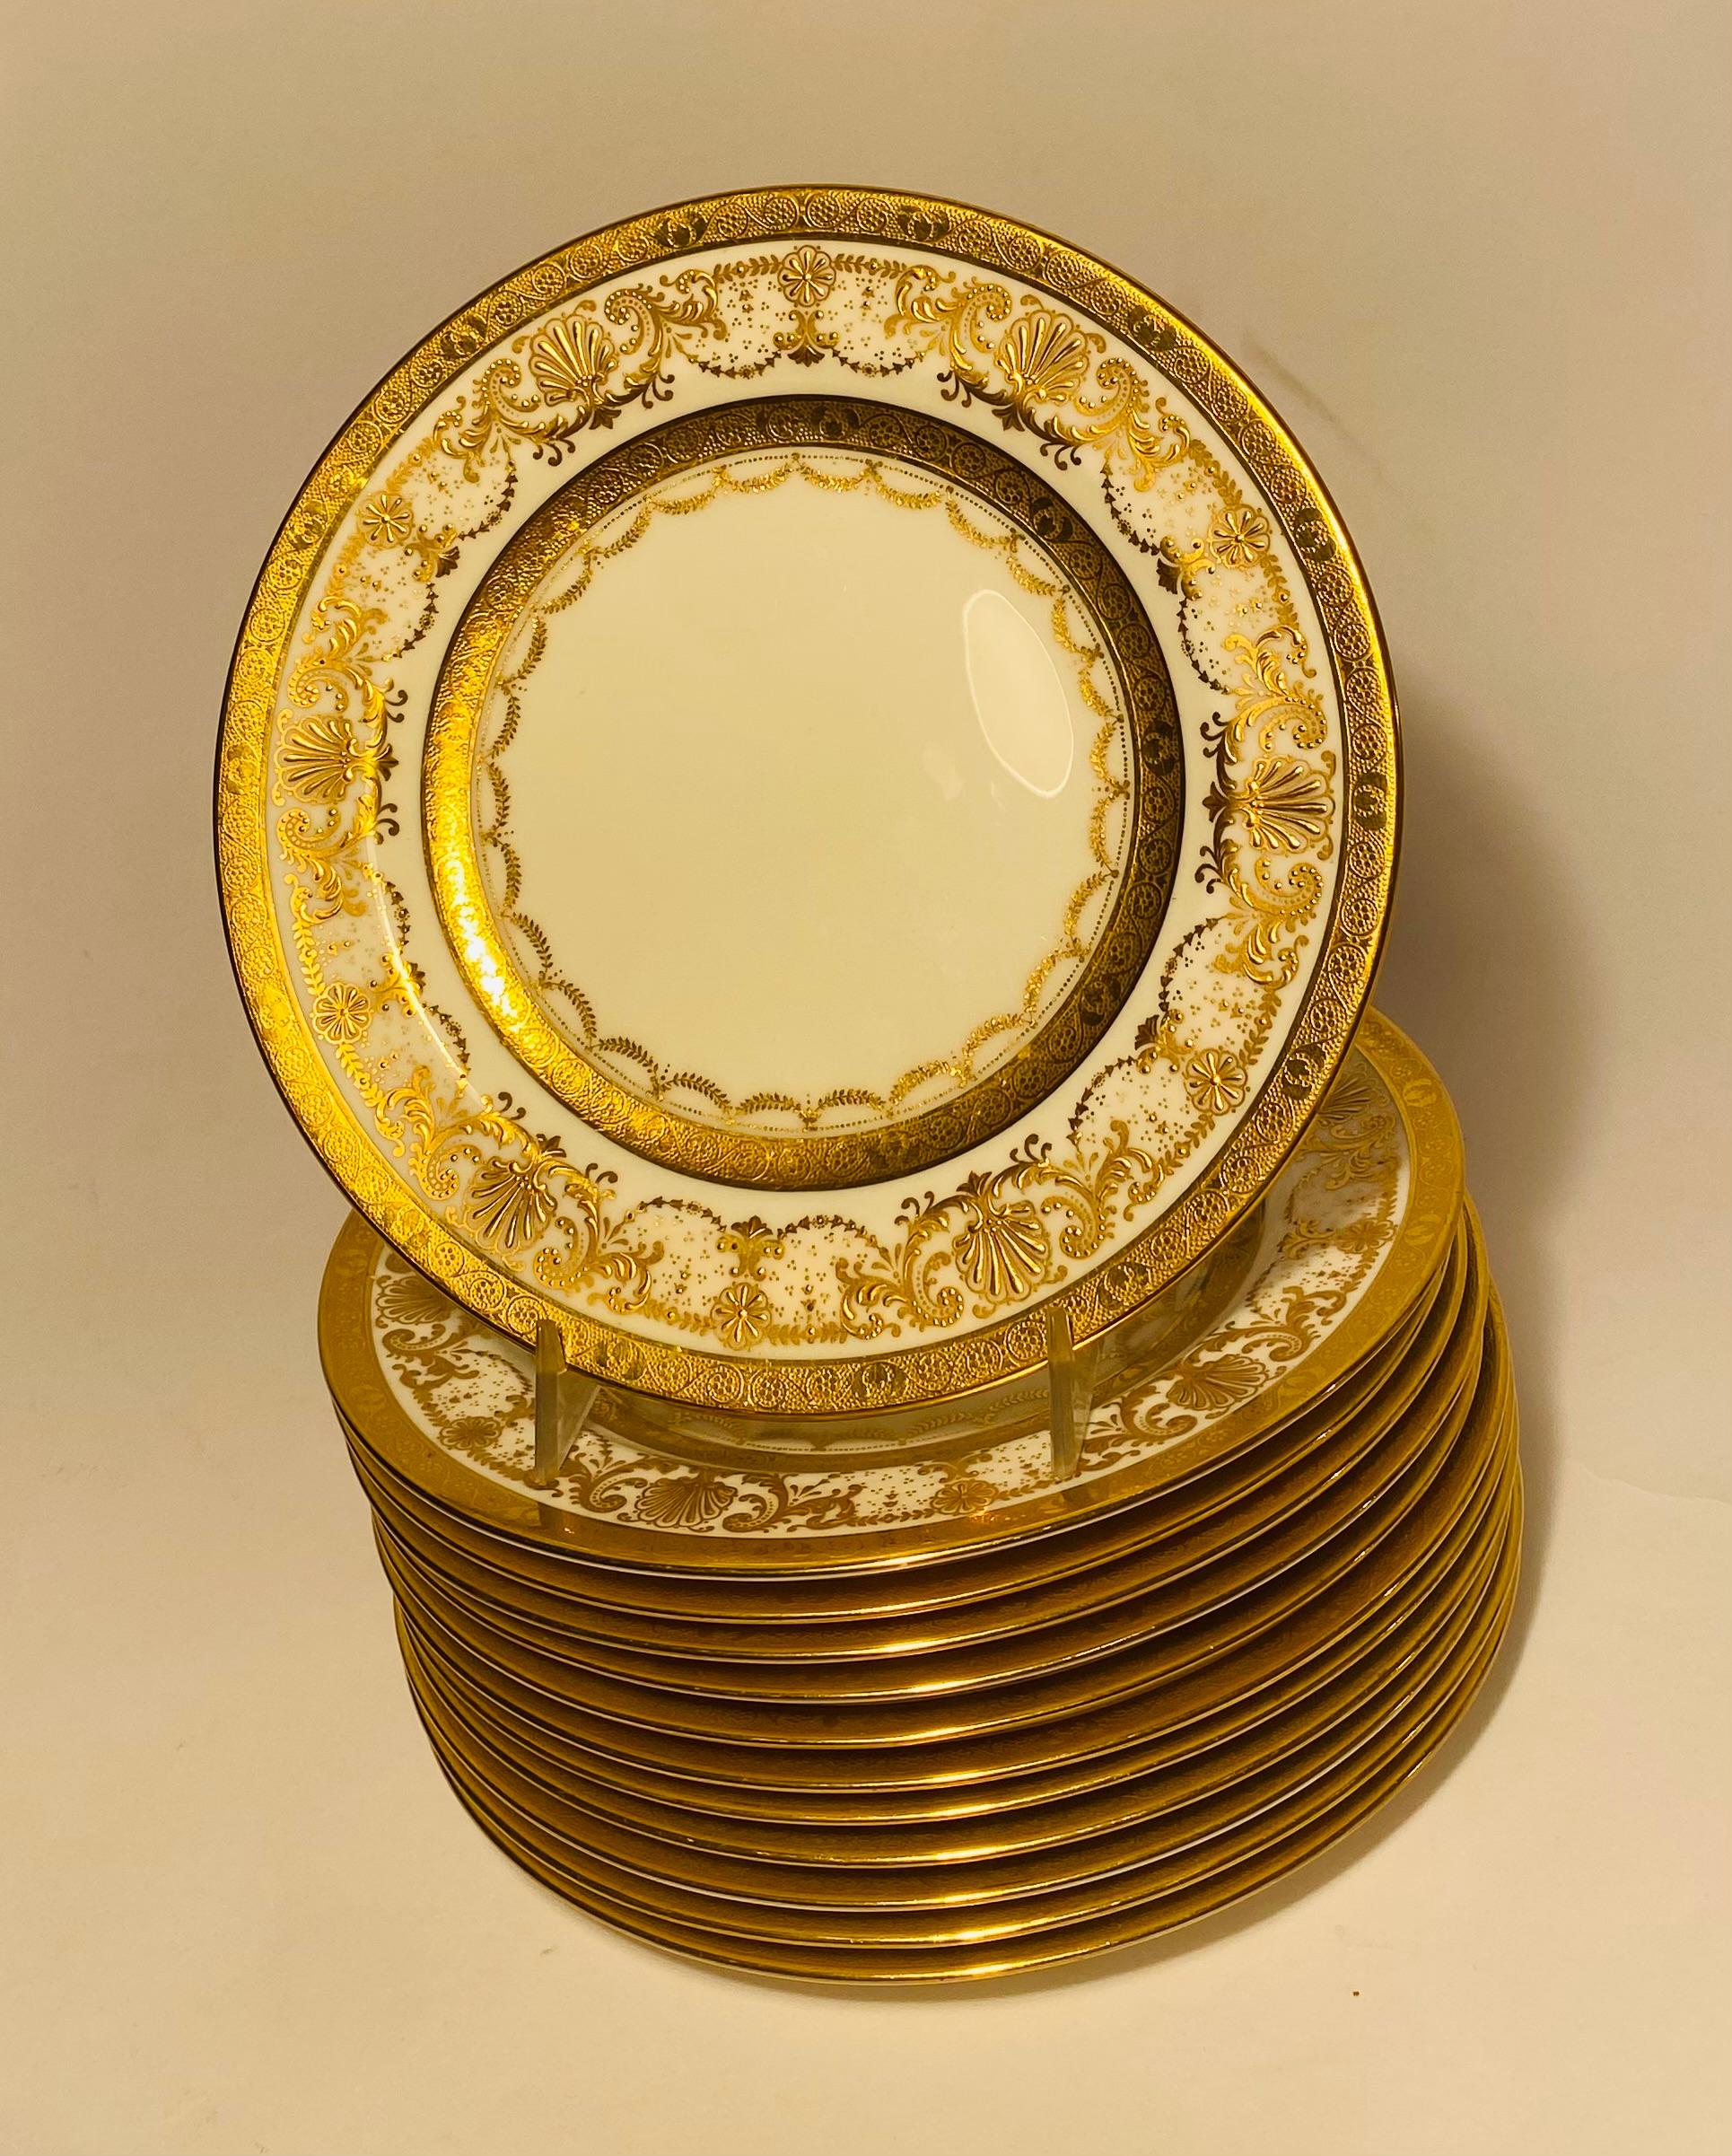 12 Antique English Raised Gilt Encrusted Salad or Dessert Plates Circa 1910 In Good Condition For Sale In West Palm Beach, FL